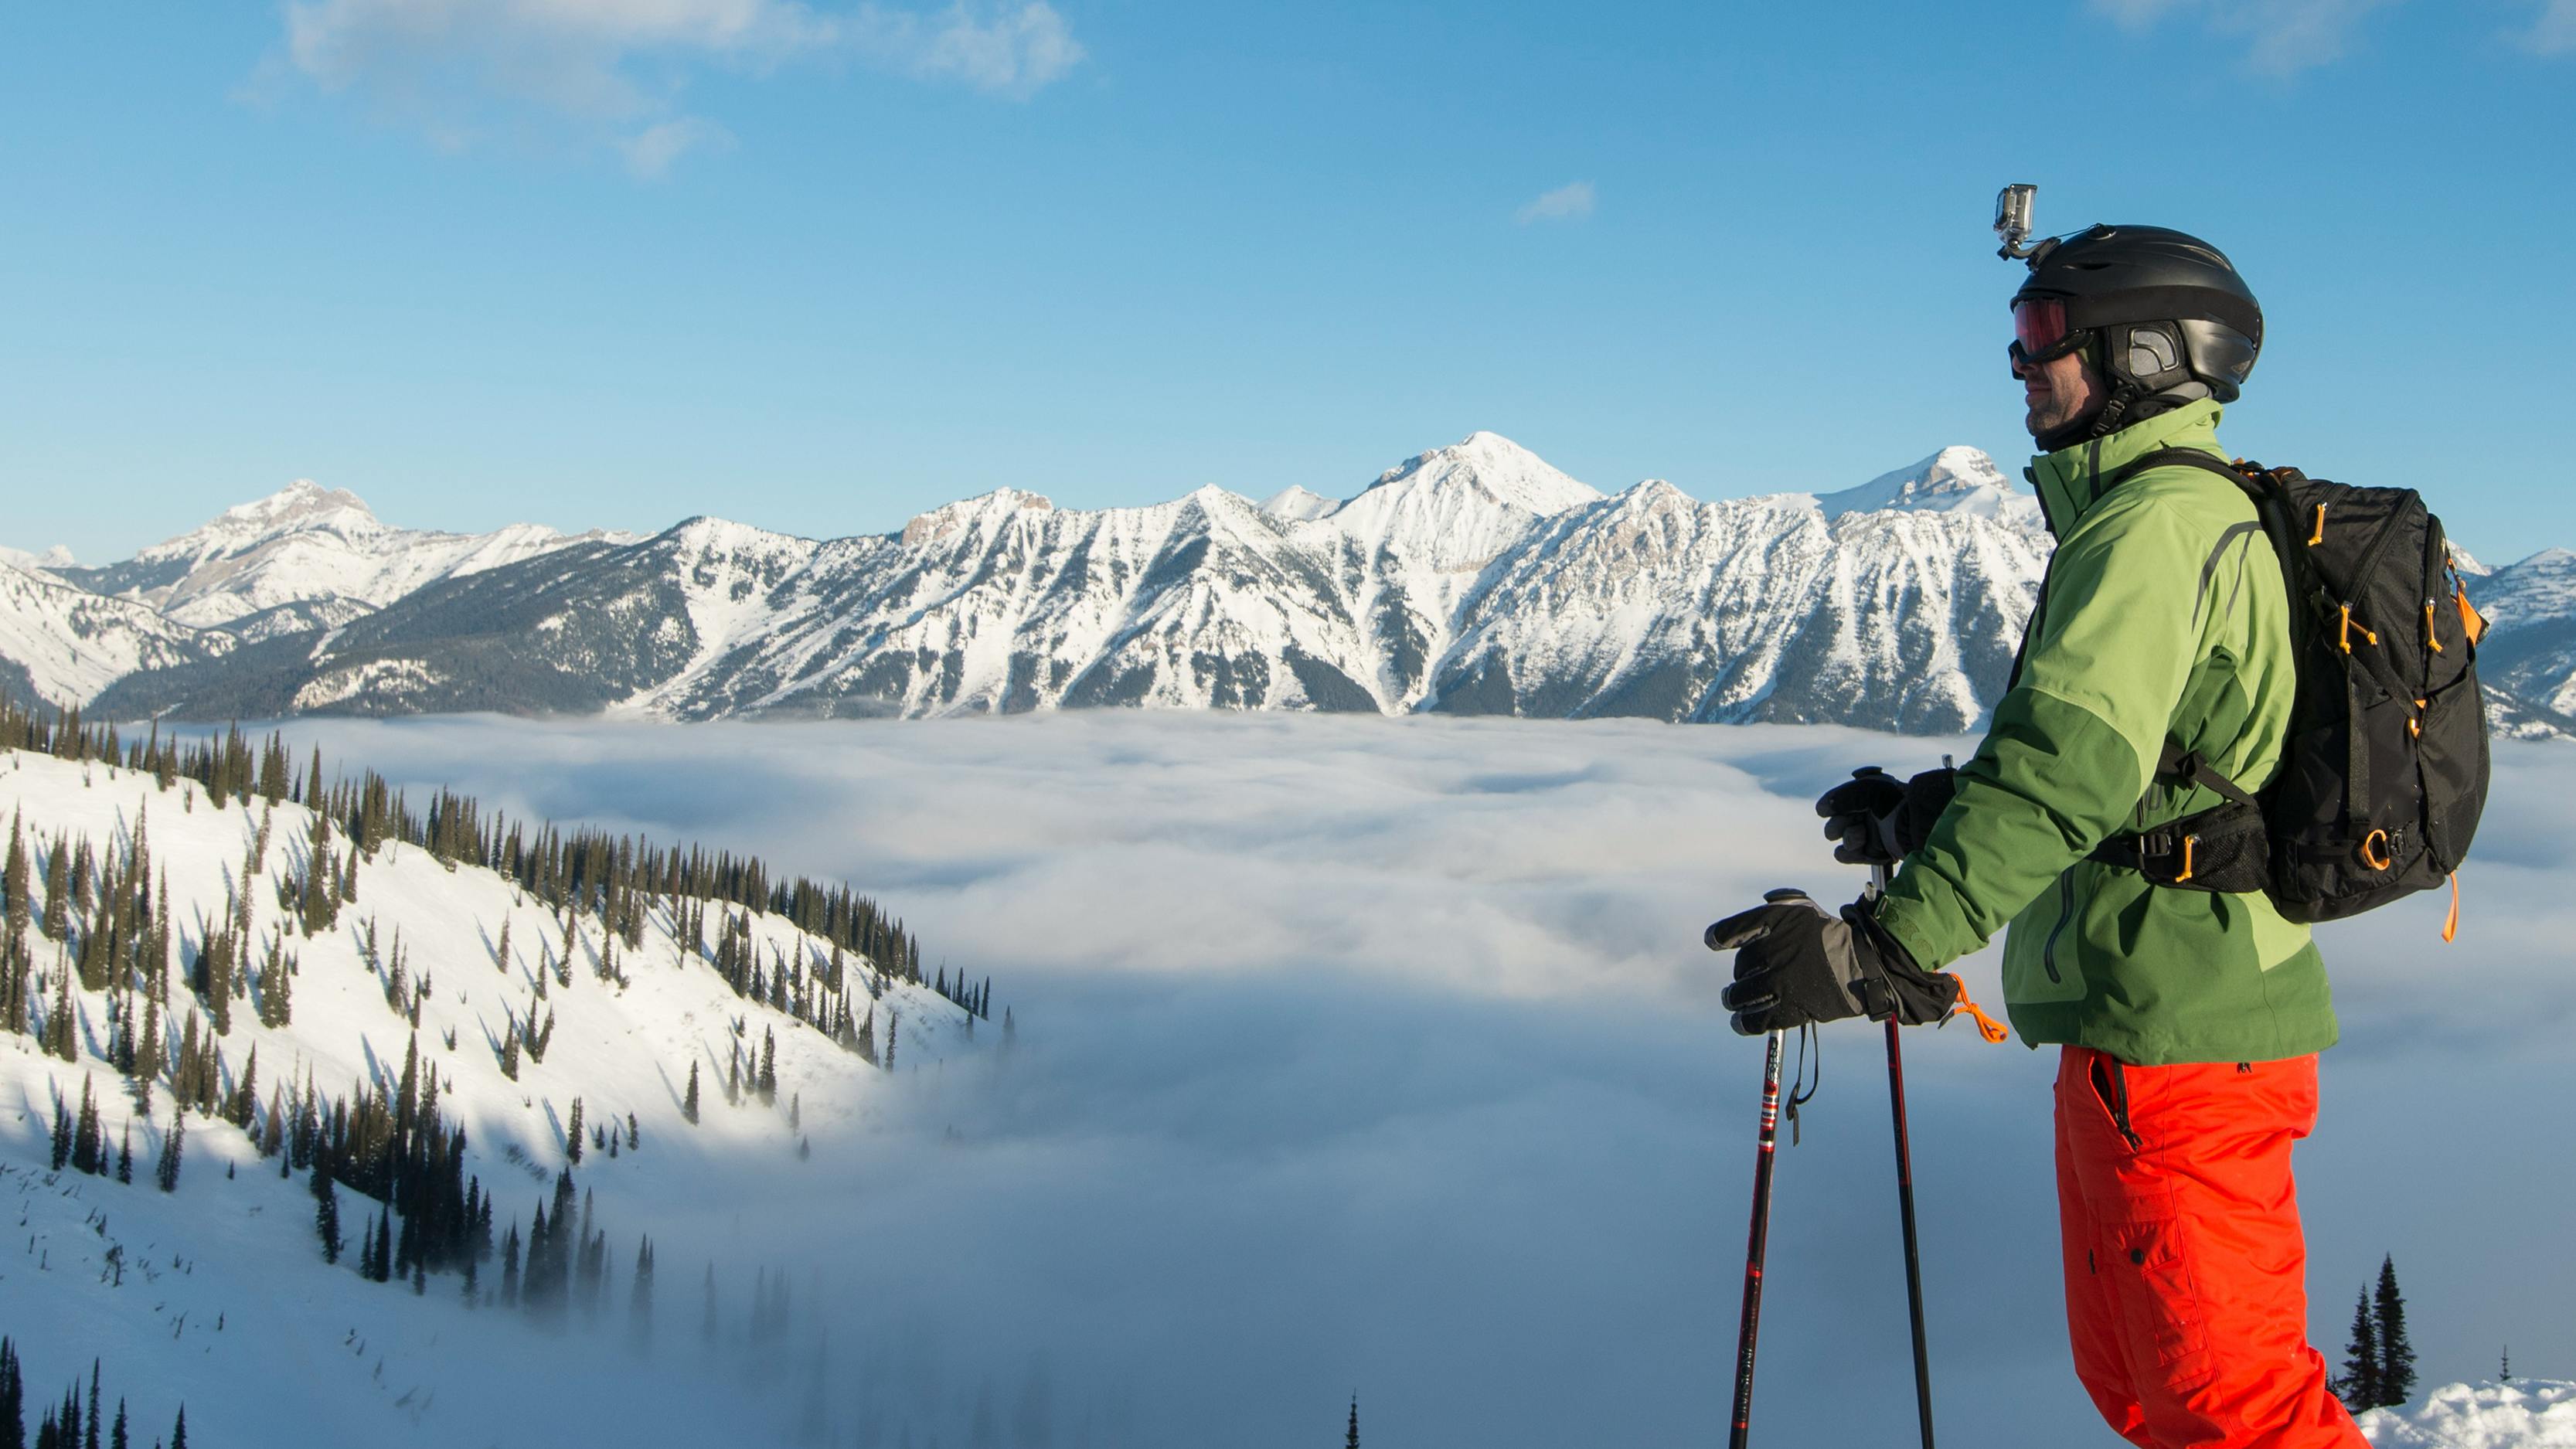 A skier stands on a ridge and looks out towards mountains in the distance. 